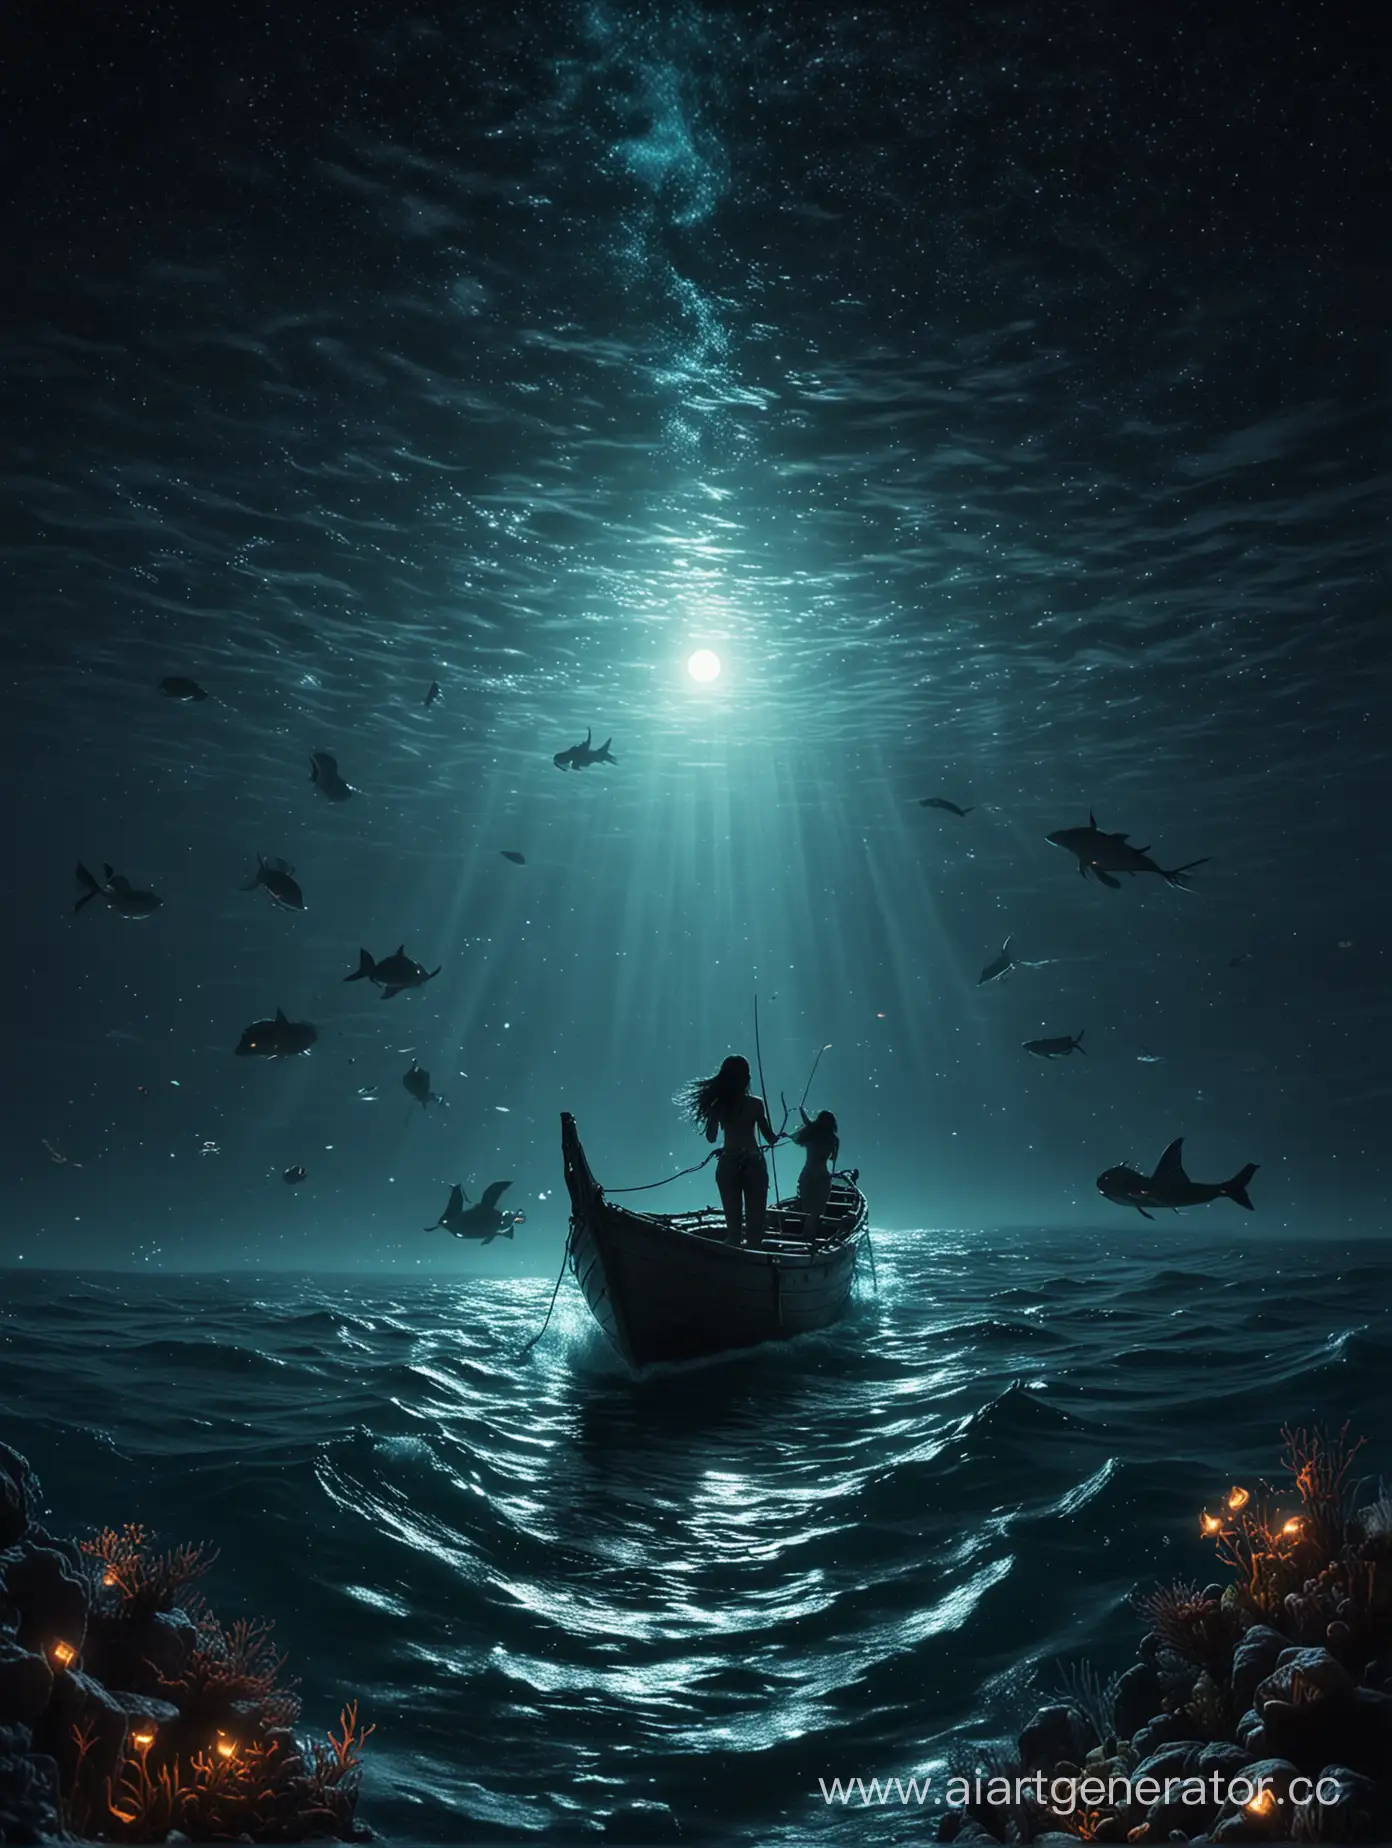 Nighttime-Encounter-Small-Boat-with-Silhouetted-Mermaids-and-Fish